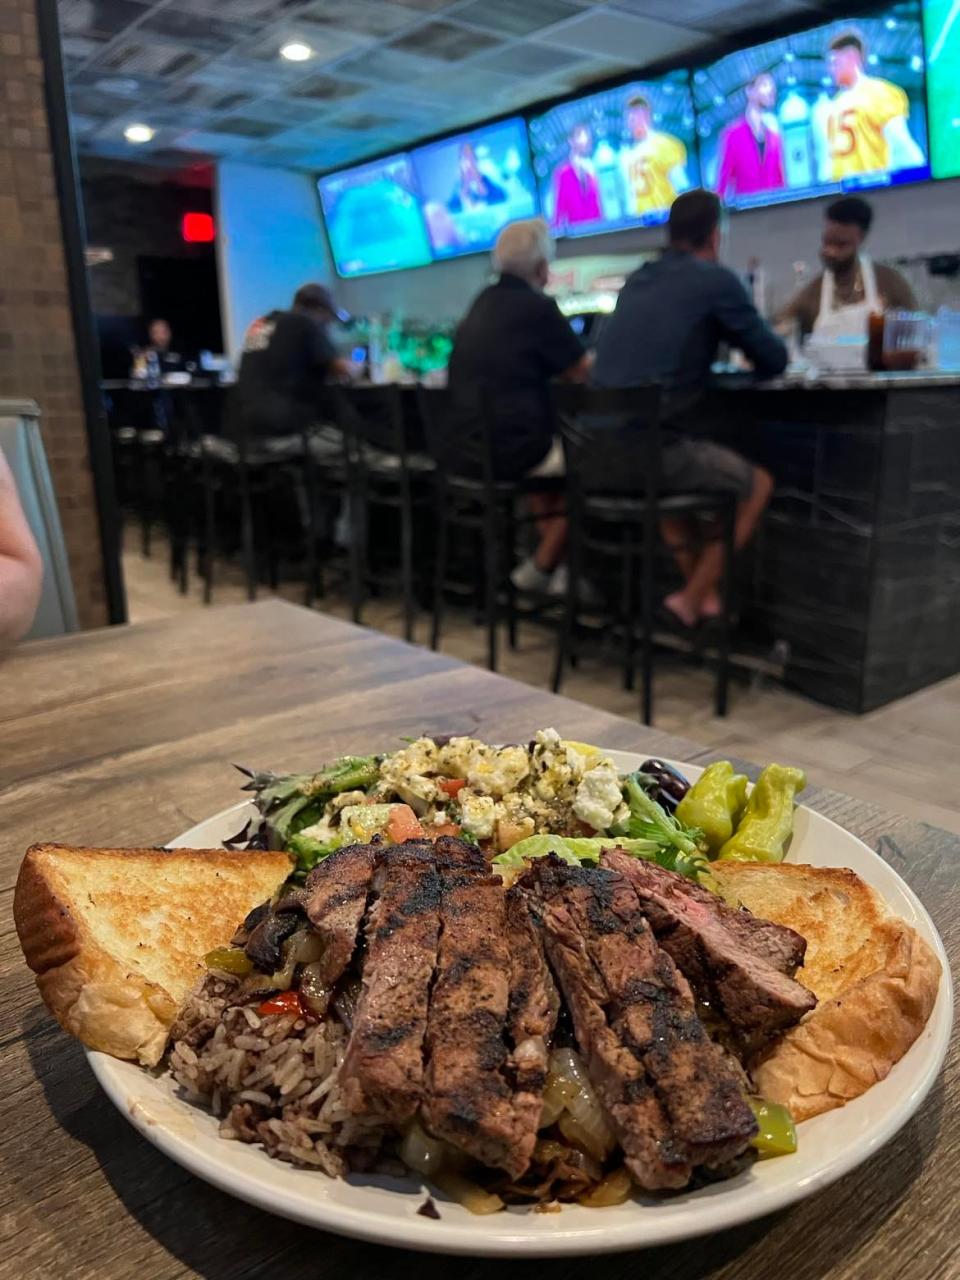 The Mediterranean platter at the new Loby's Grille on CLE in Canton stands out among the sports bar staples of the restaurant.